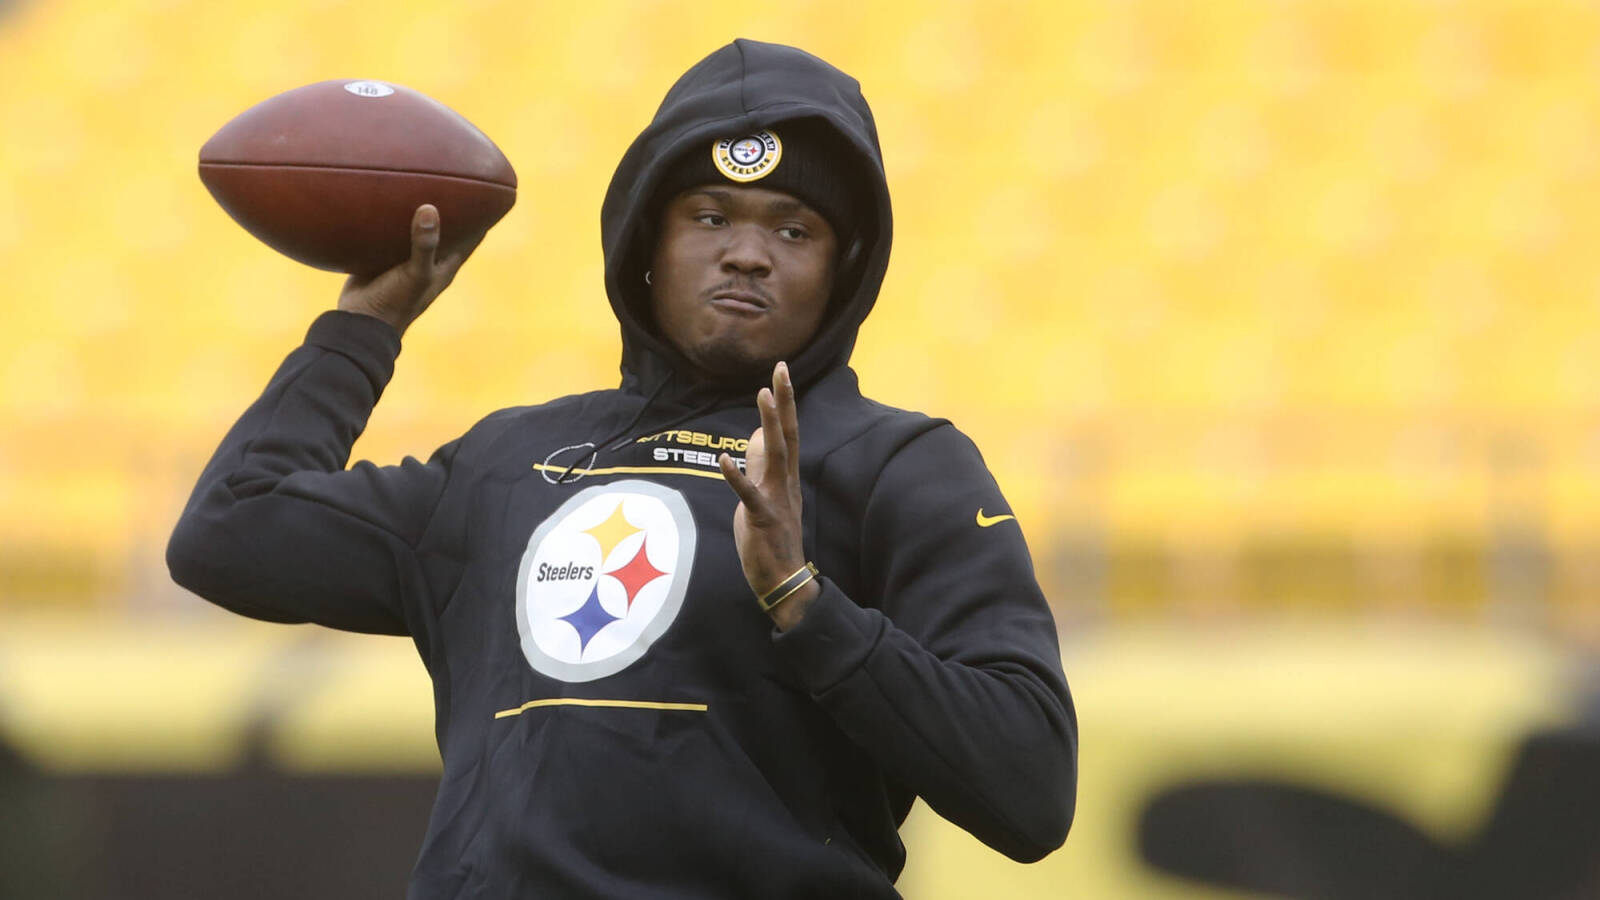 Steelers to honor Dwayne Haskins with uniform detail